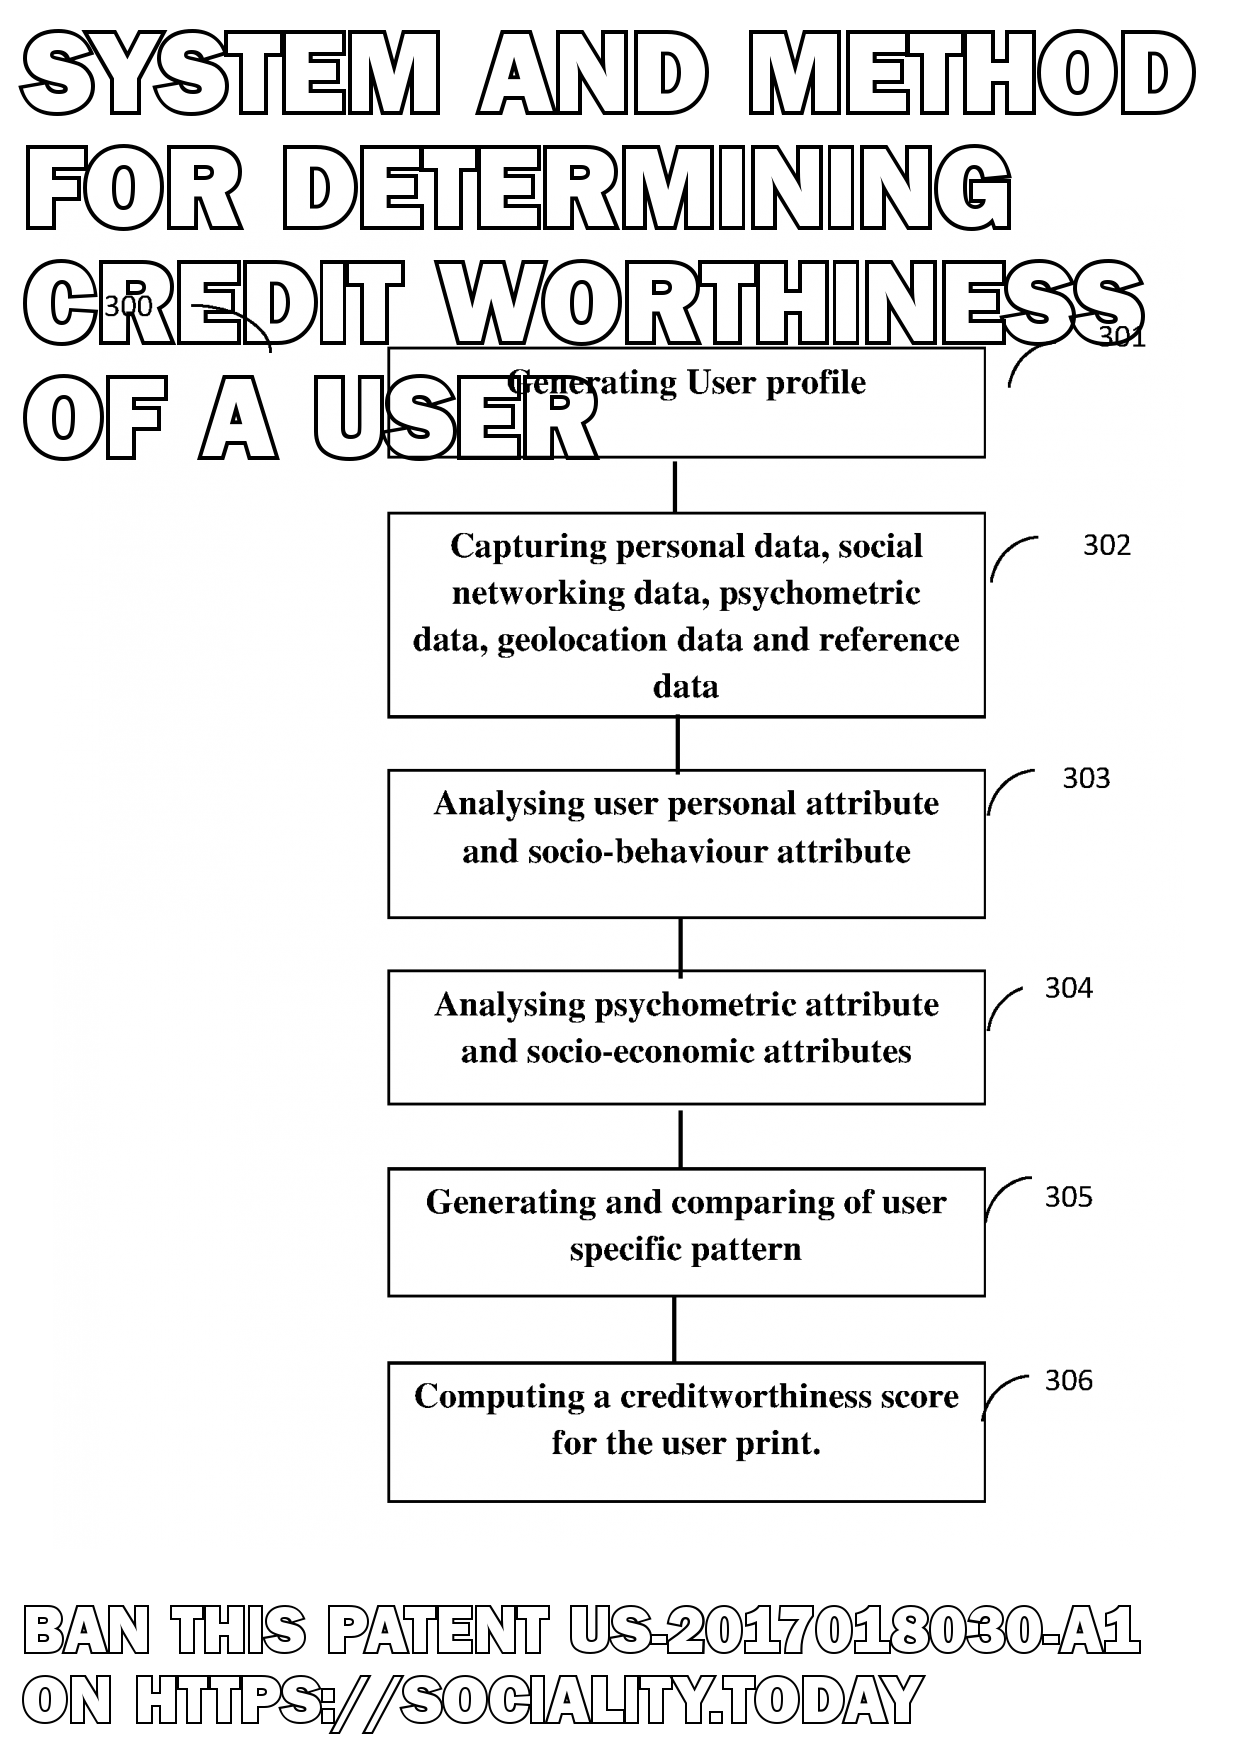 System and Method for Determining Credit Worthiness of a User  - US-2017018030-A1